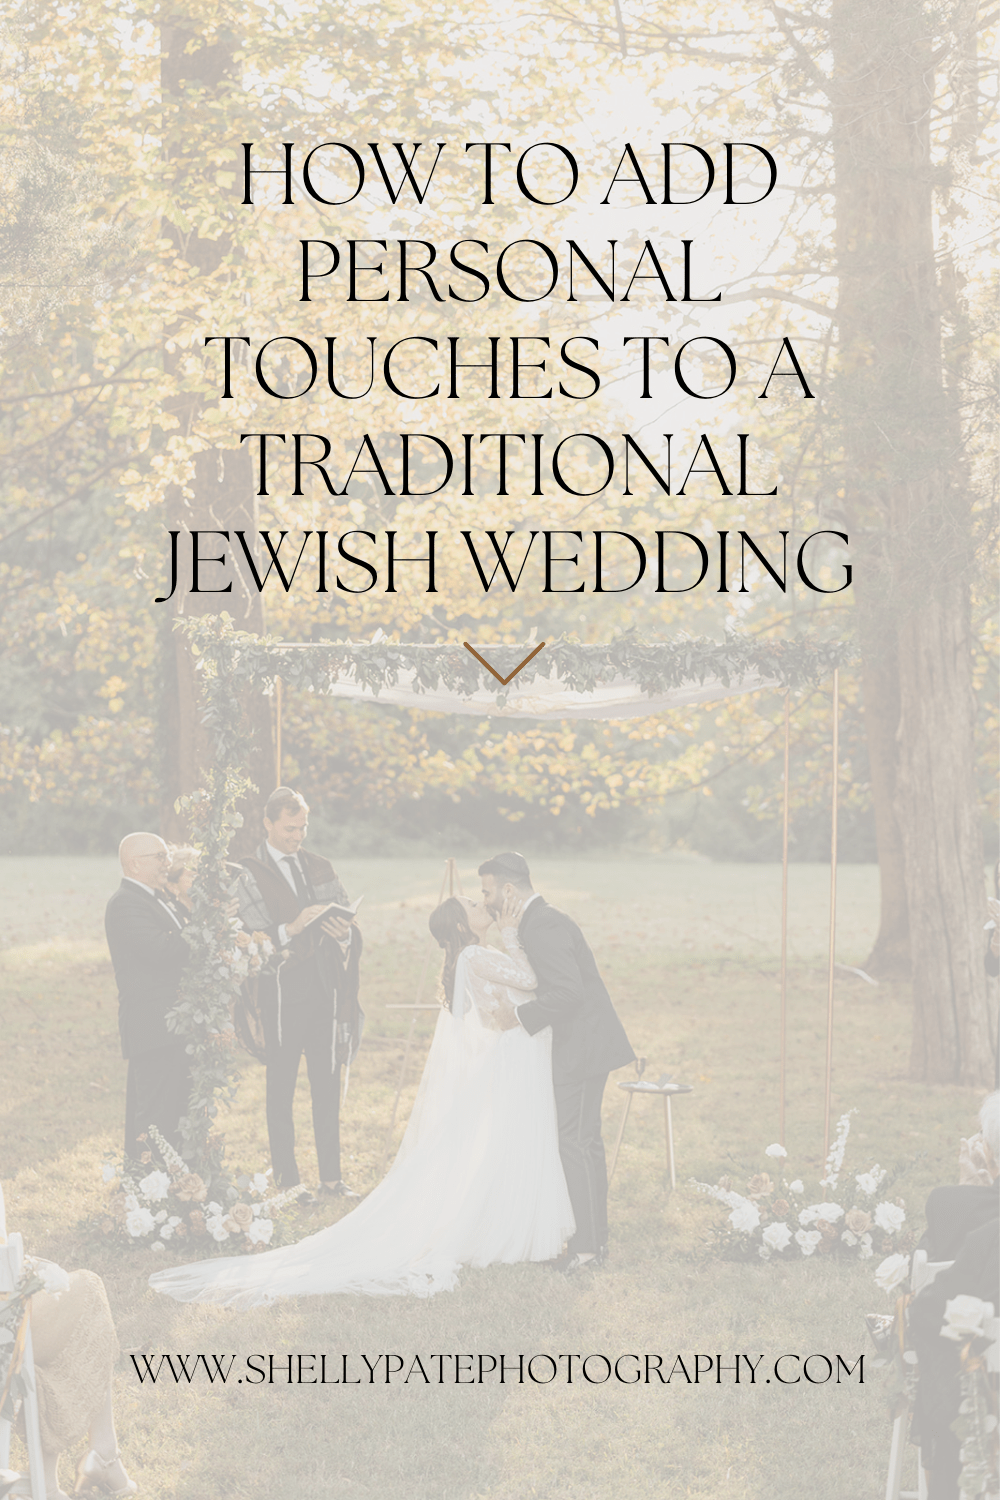 how to add personal touches to a traditional Jewish wedding